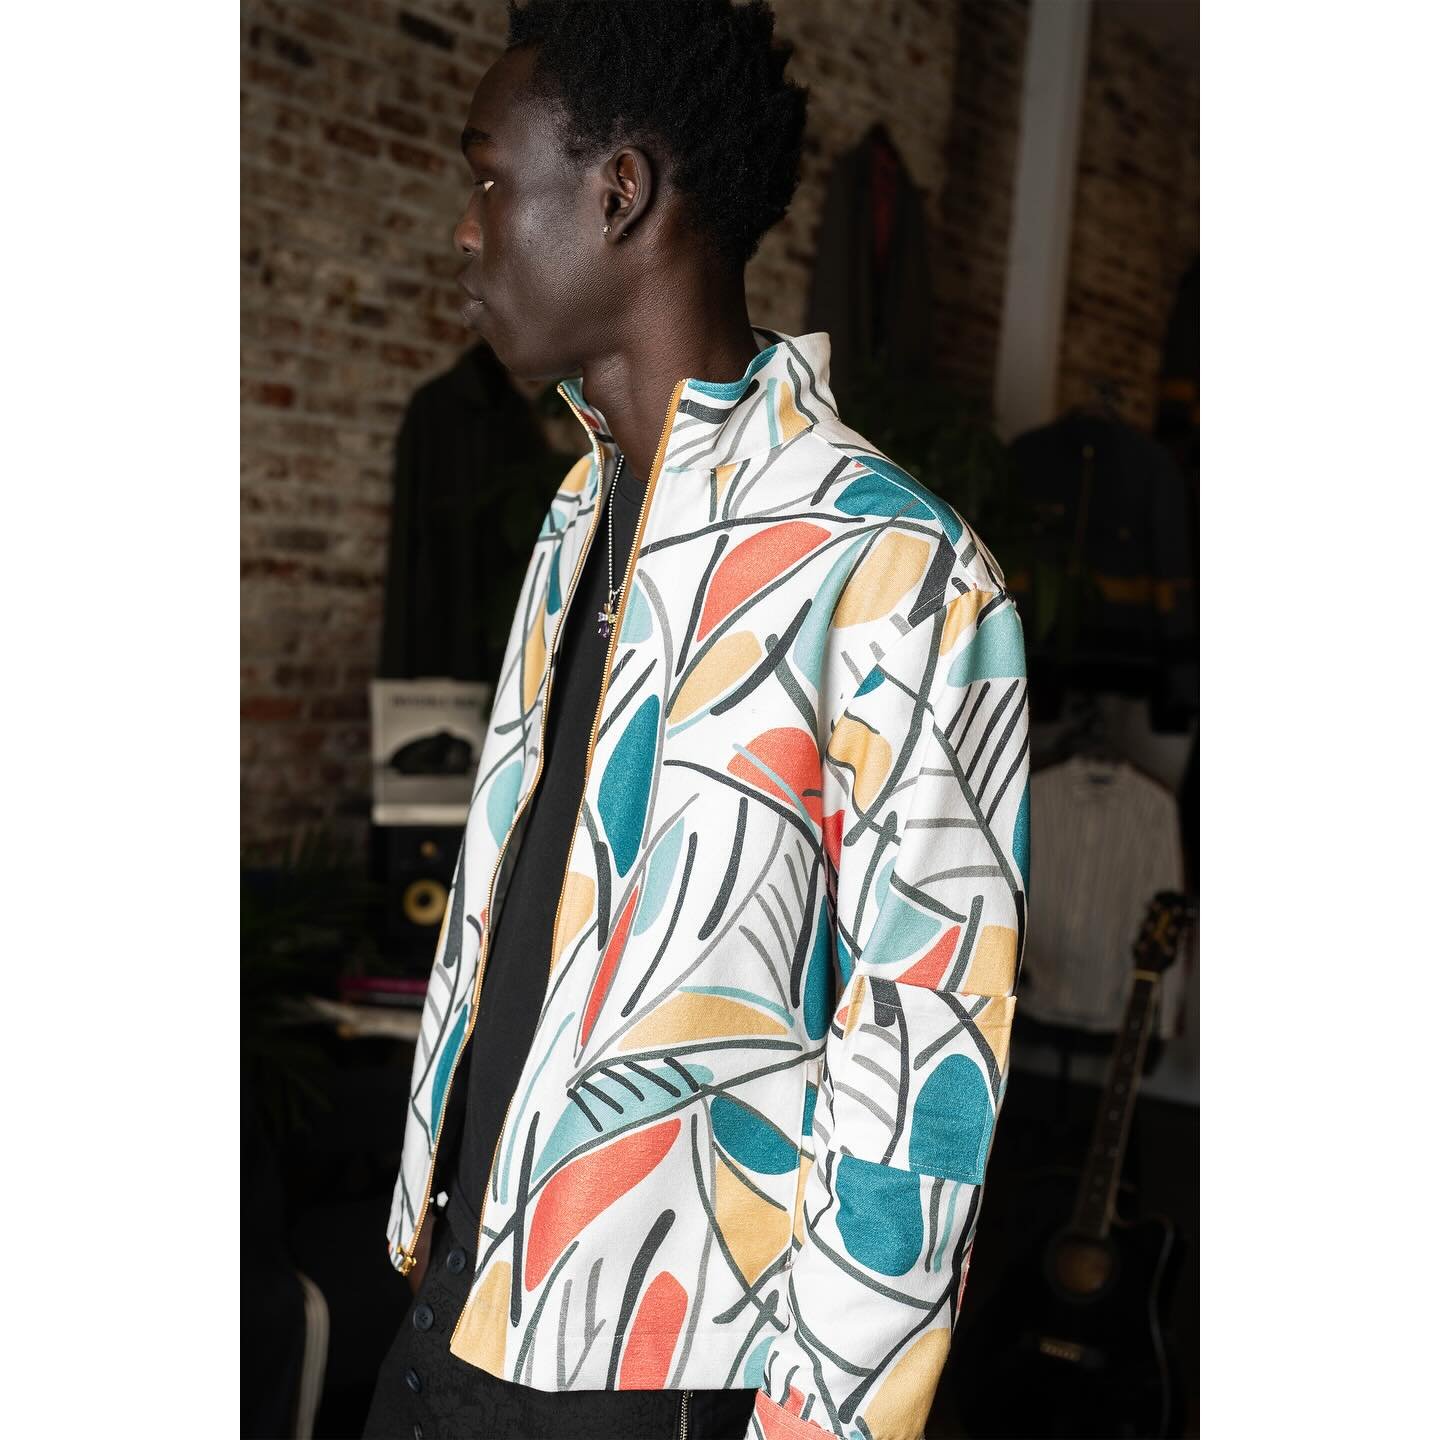 Our New Henri jacket in citrus print 
Now avail @ our Javelin Bk shop and online. 
Made with Passion on 39th st
#springjacket